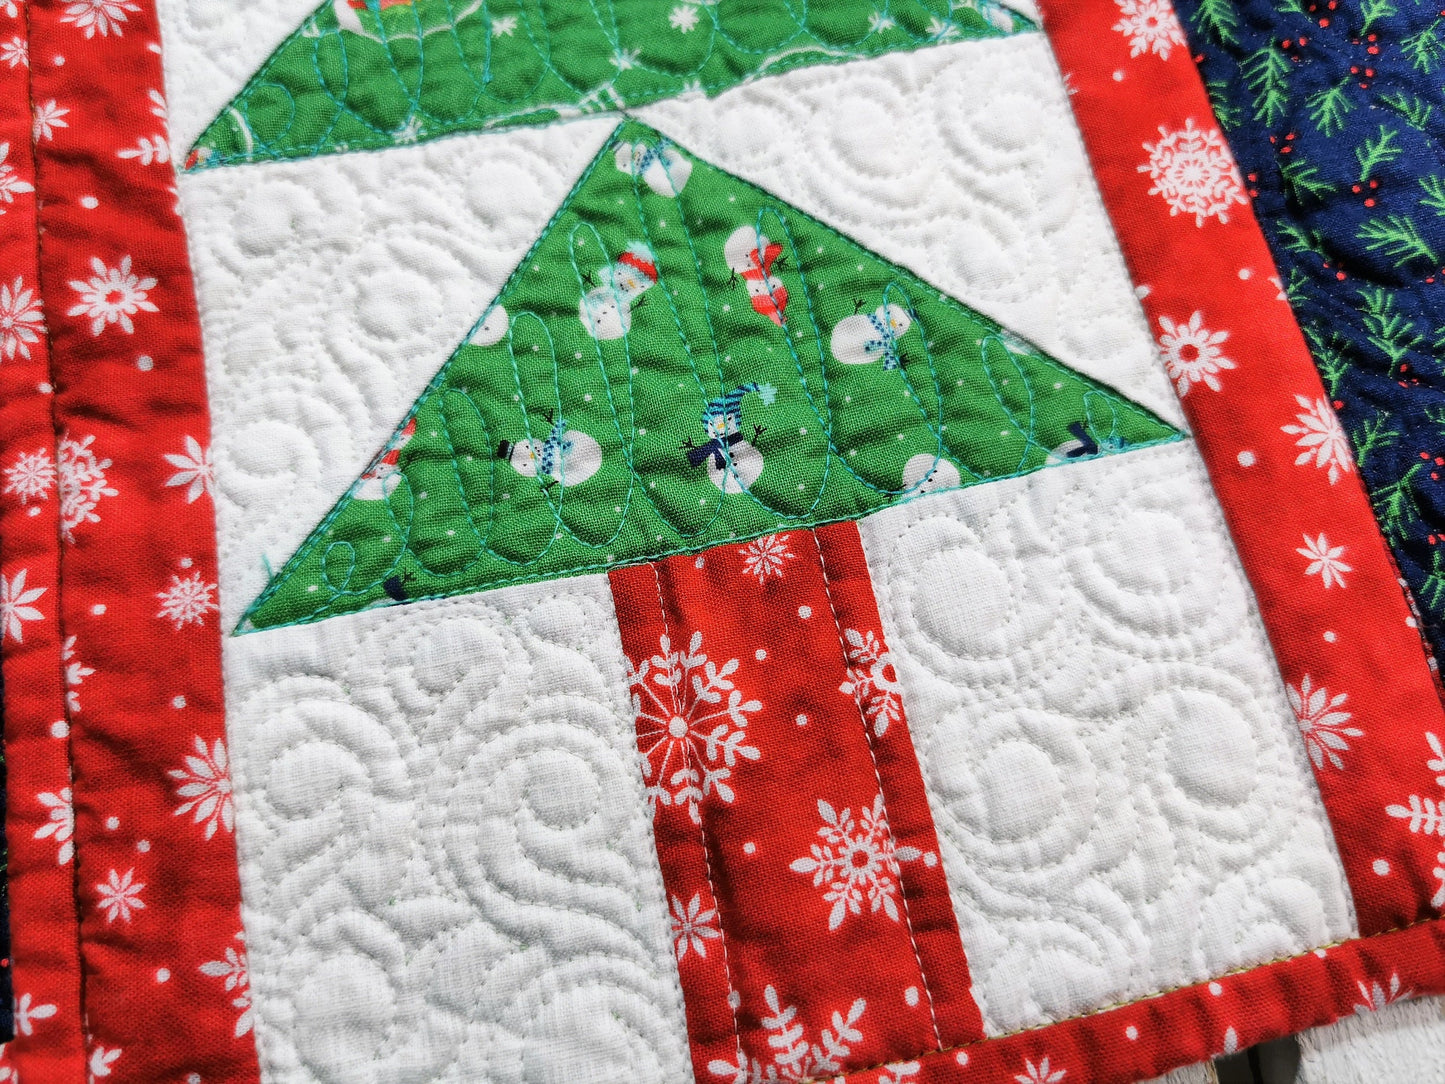 Four Quilted Christmas Tree Placemats, Reversible Winter Theme Table Mats